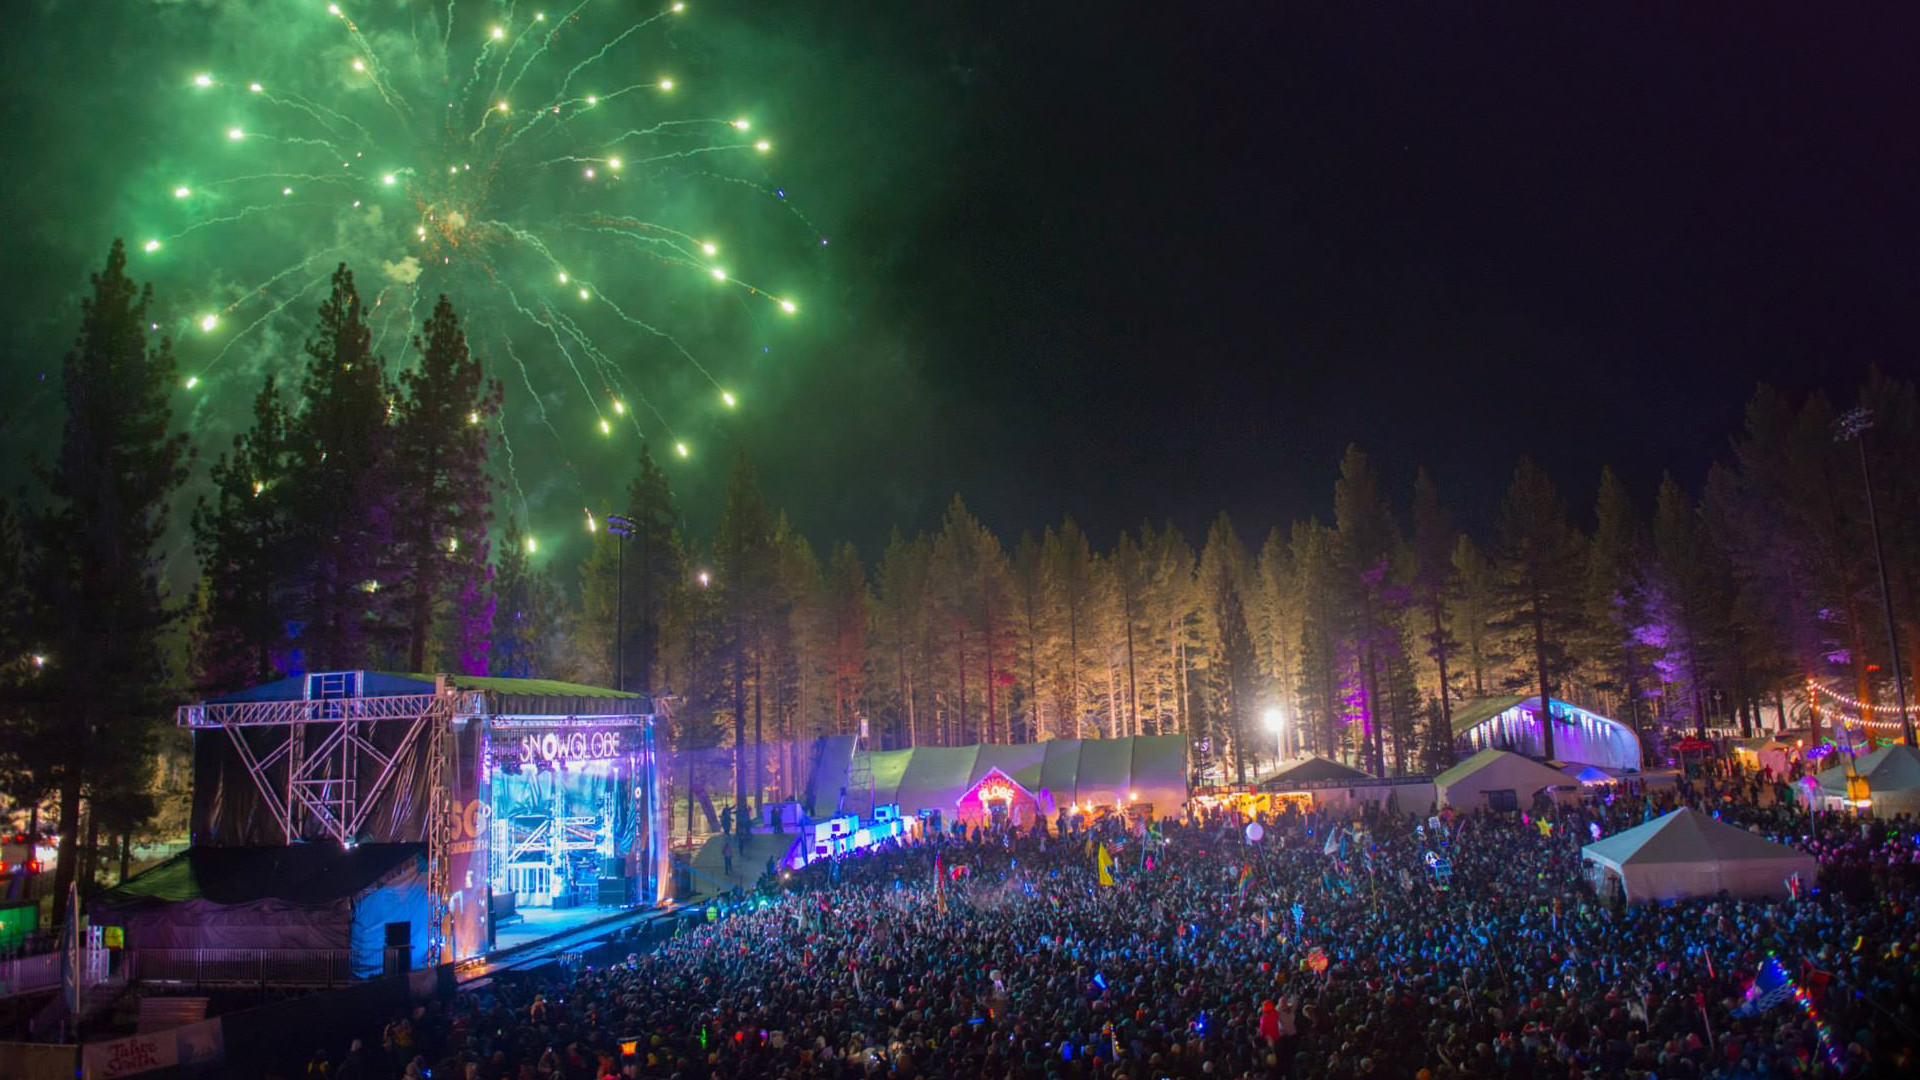 1920x1080 Snowglobe Music Festival will be returning to Lake Tahoe, California this  December for another unforgettable New Years Eve weekend in the mountains.